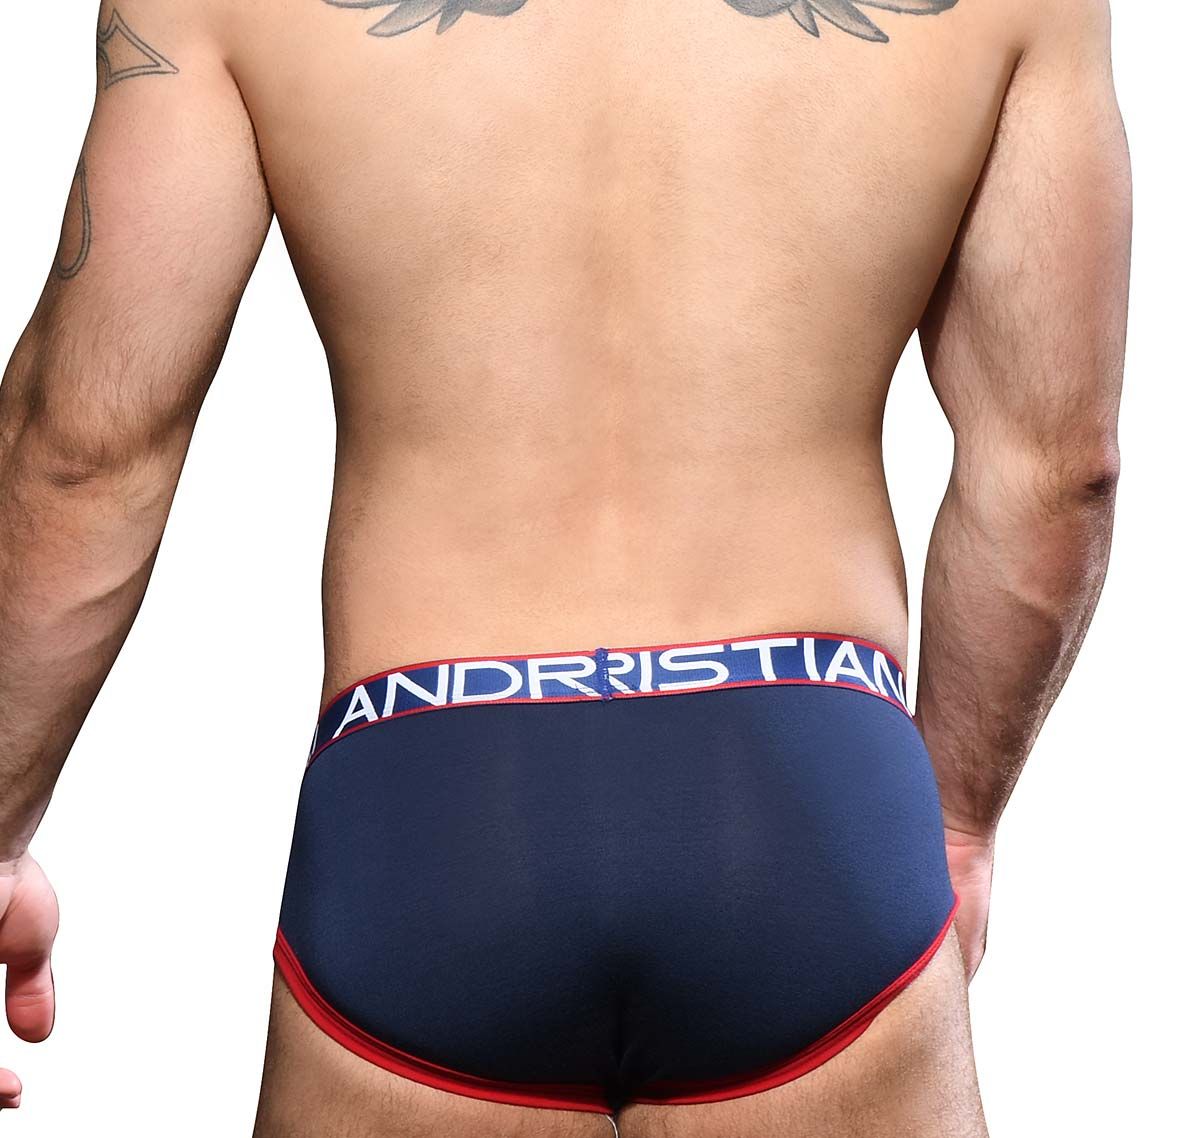 Andrew Christian Brief ALMOST NAKED RETRO BRIEF 92273, navy